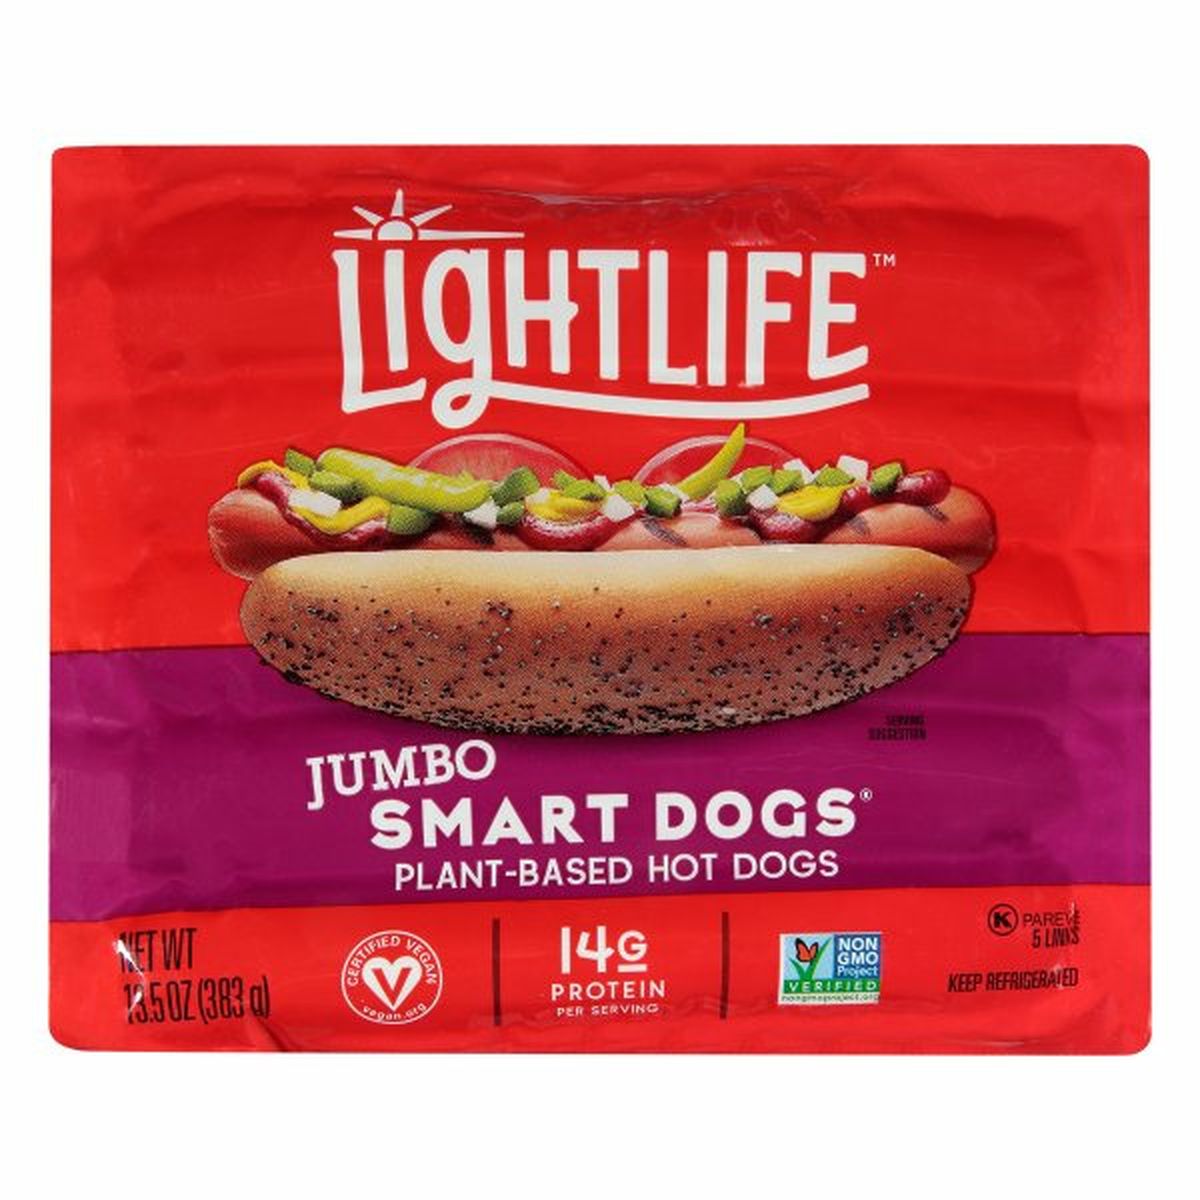 Calories in Lightlife Smart Dogs Hot Dogs, Plant-Based, Jumbo